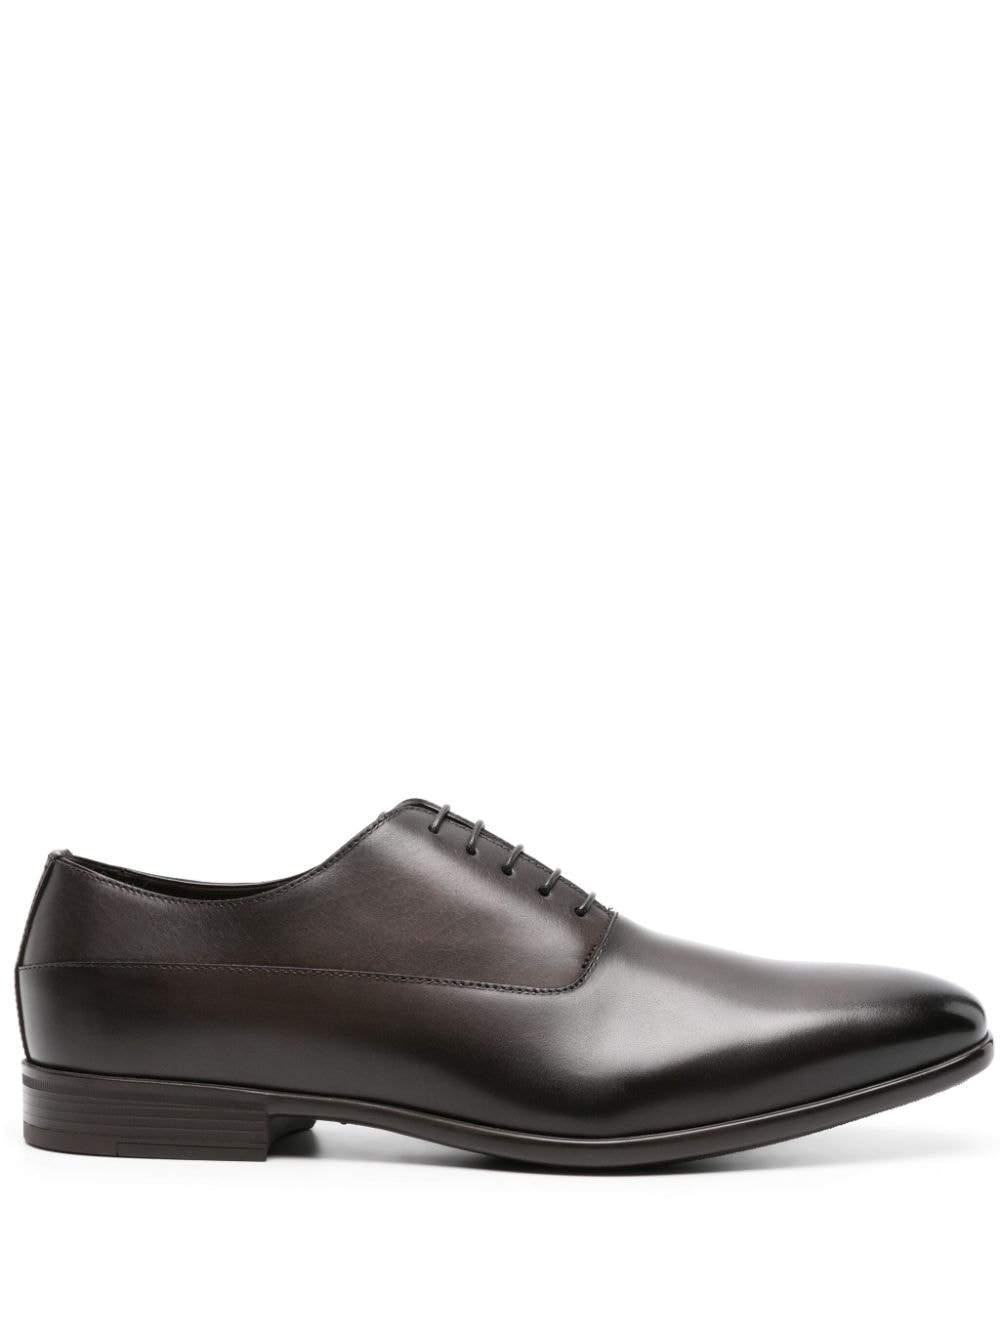 Doucal's lace-up leather Oxford shoes - Brown von Doucal's